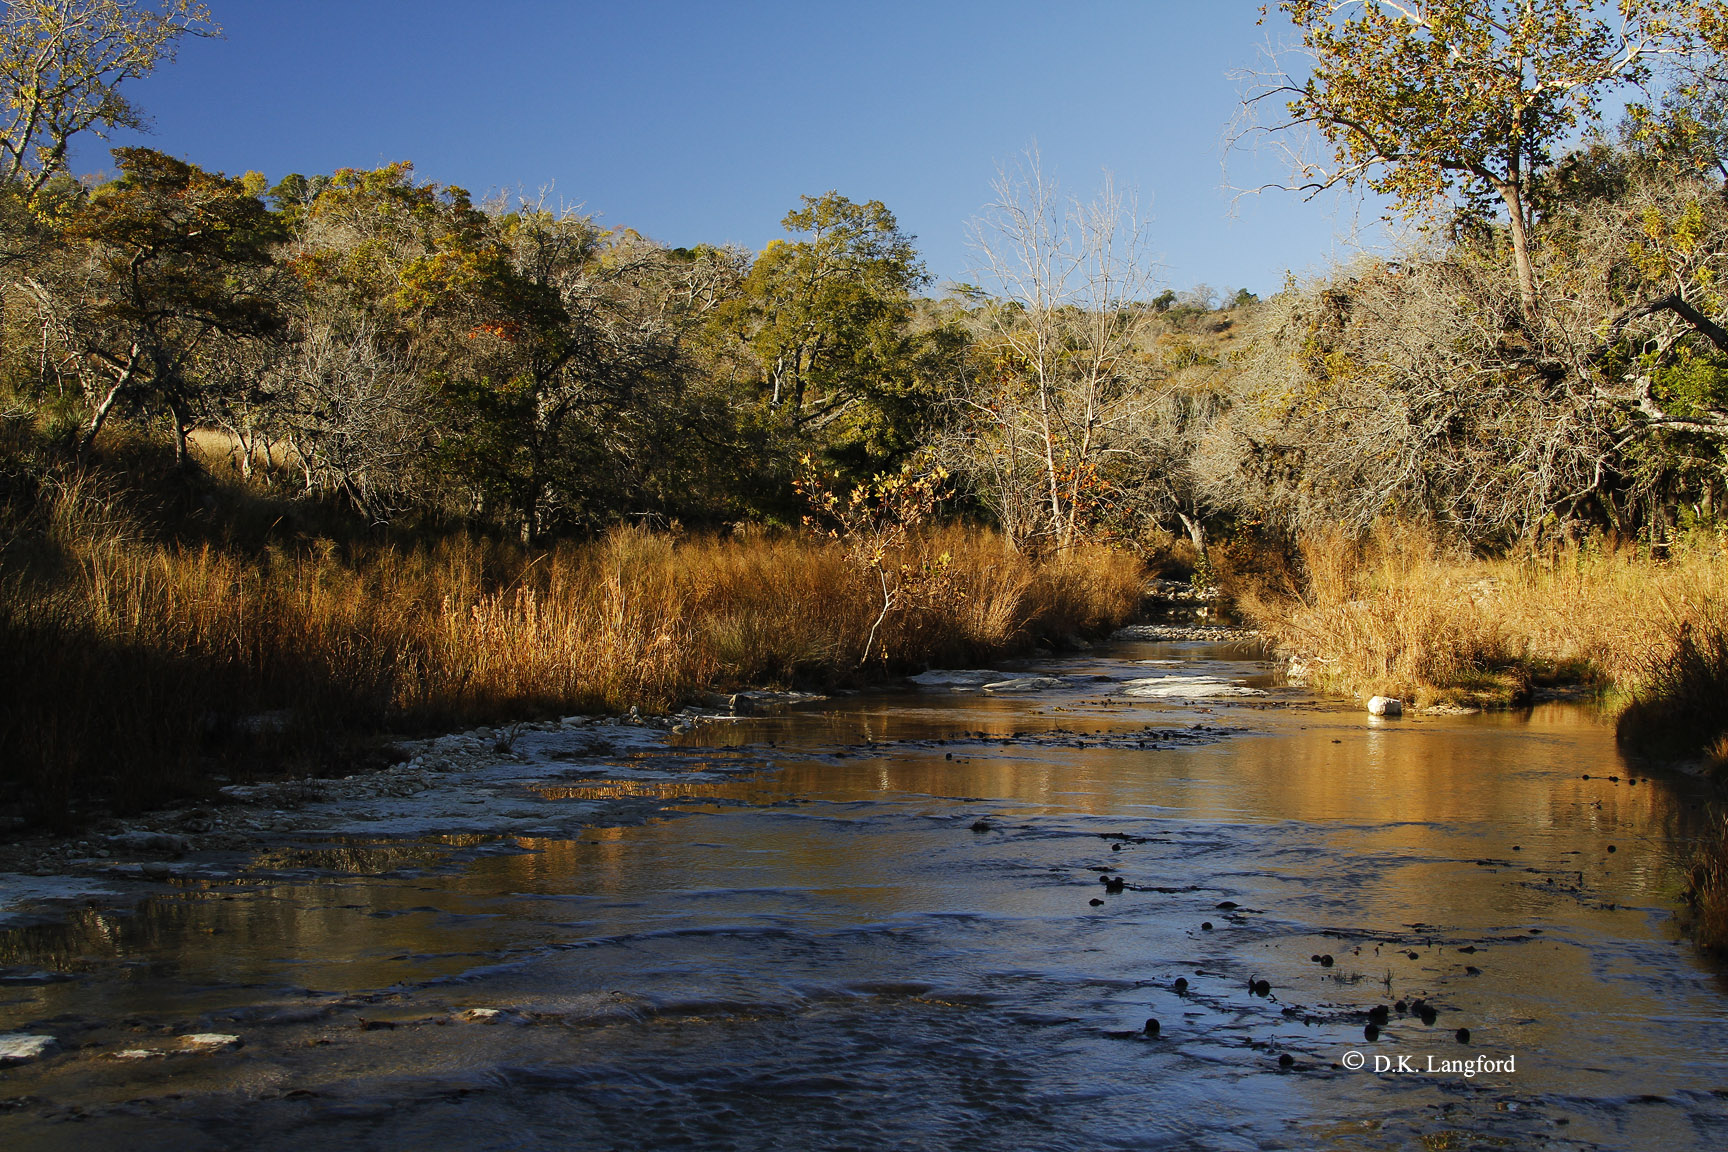 Texas Hill Country: Water Unlike Anywhere Else